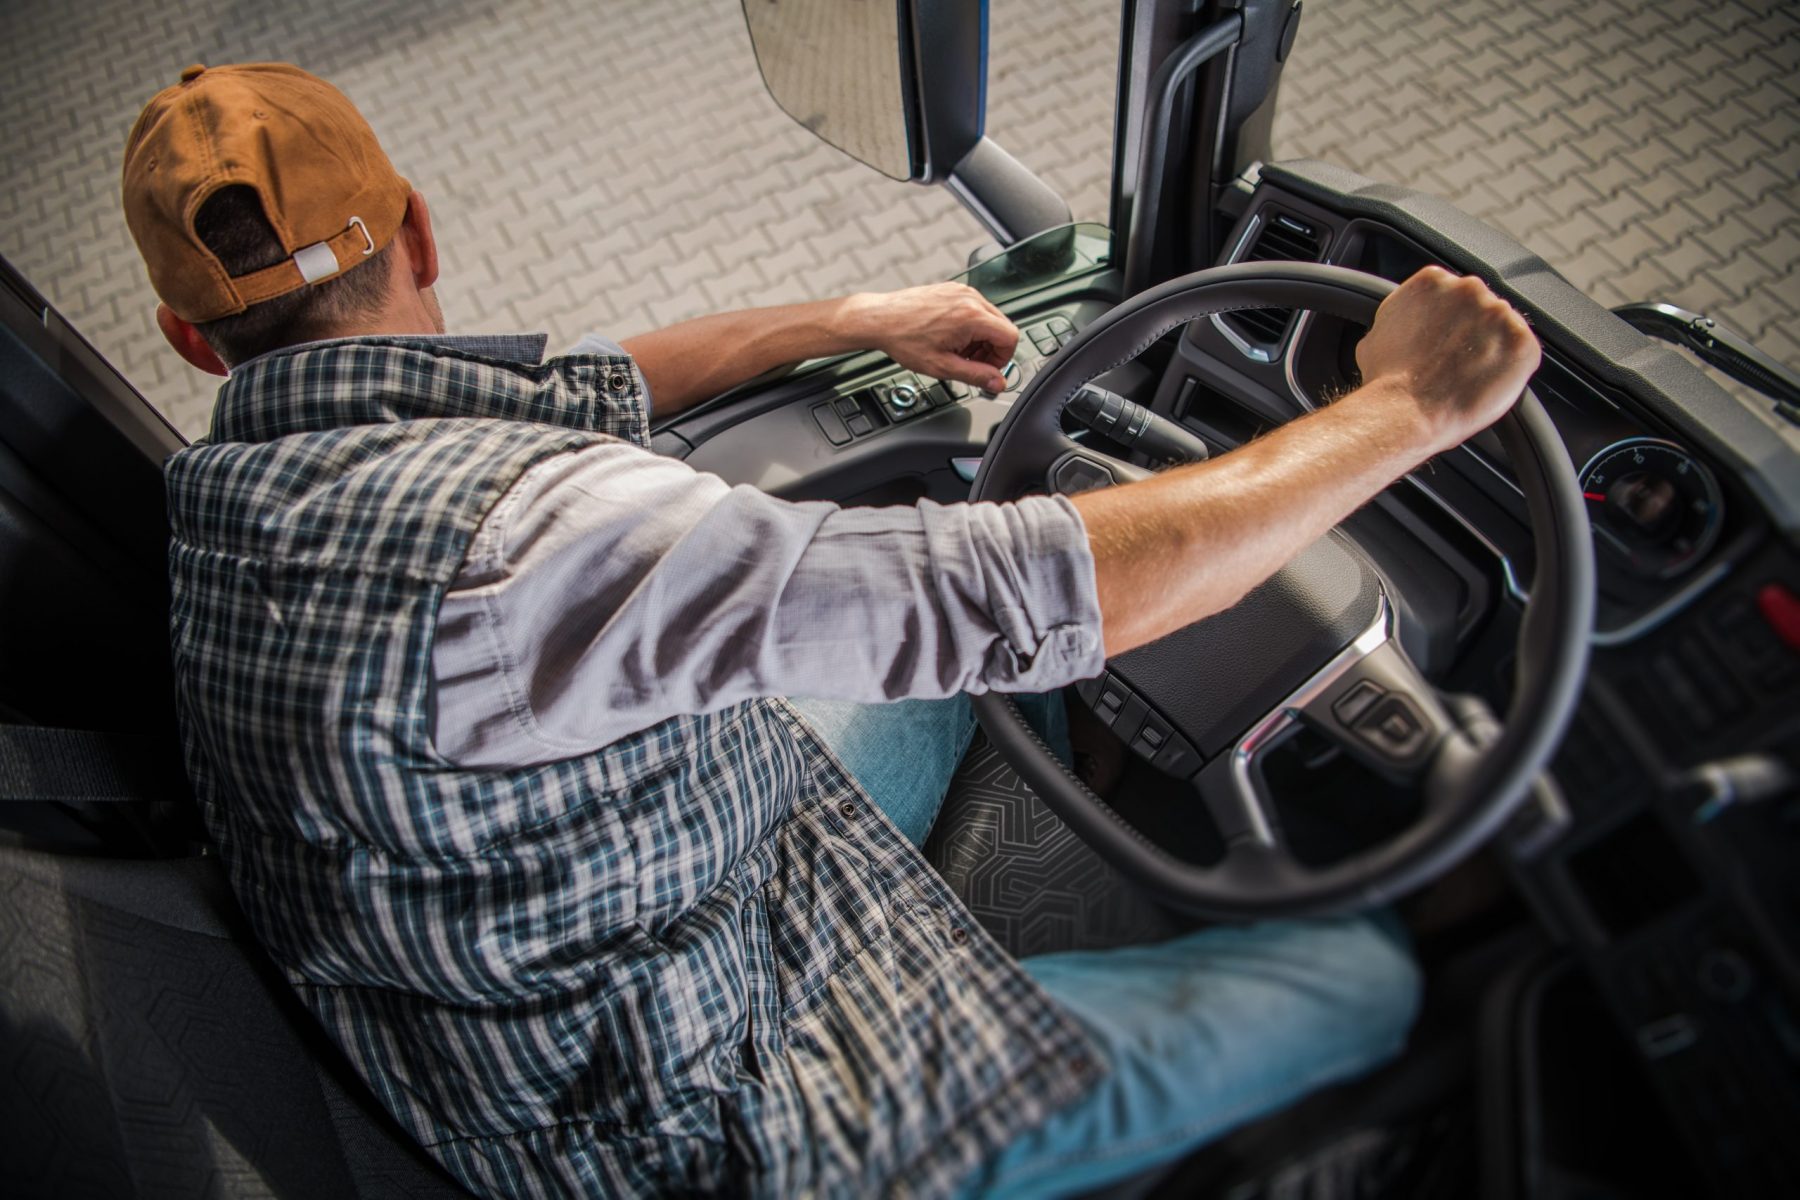 How To Quickly Become A CDL Truck Driver Before ELDT - CDL school news